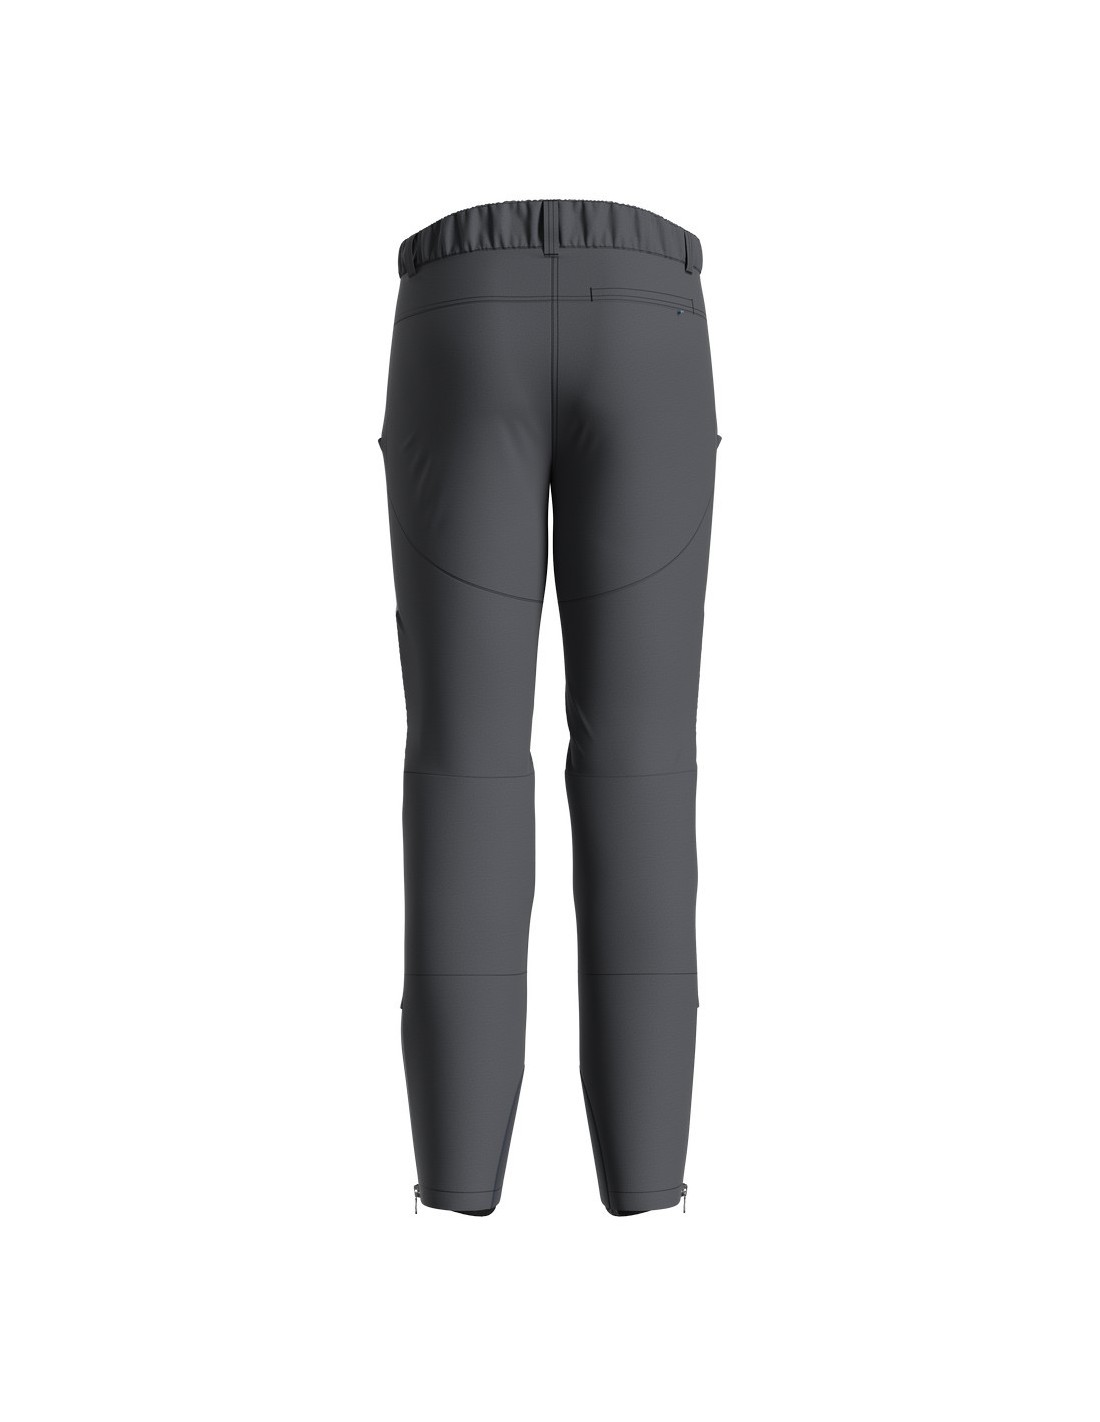 Men's Power Stretch Pro Pant - The Mountaineer